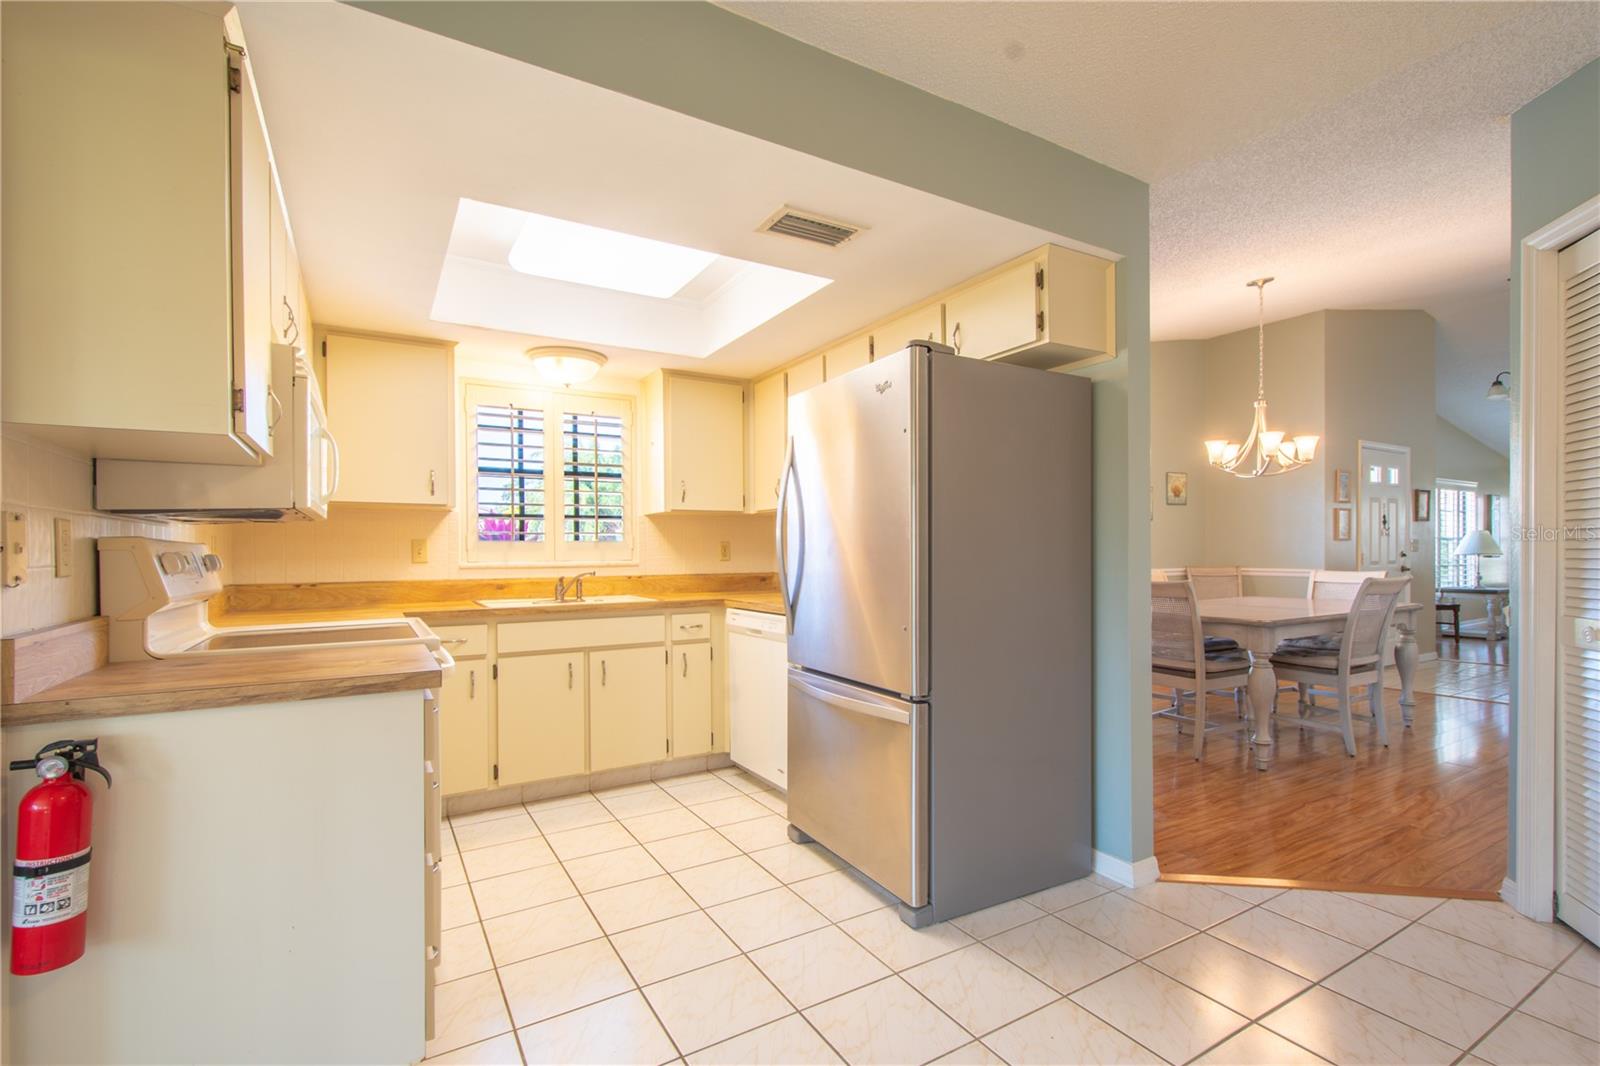 The kitchen features ceramic tile floor and plantation shutters.